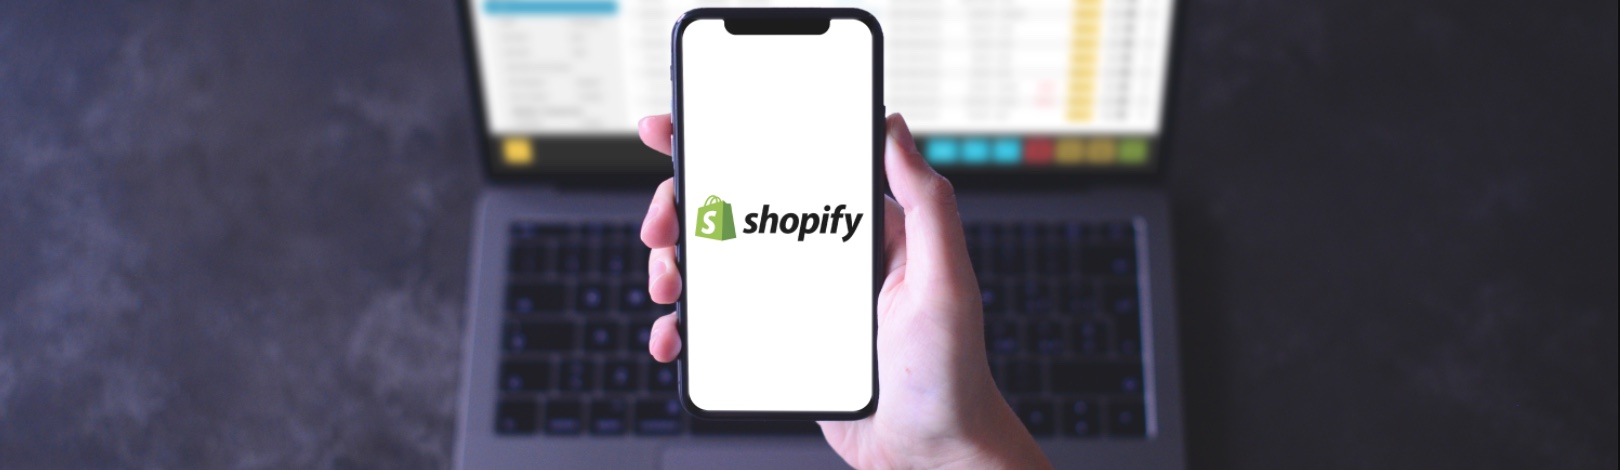 Erply Overview: How to Begin Building Your Web Store with Shopify? blog post cover image